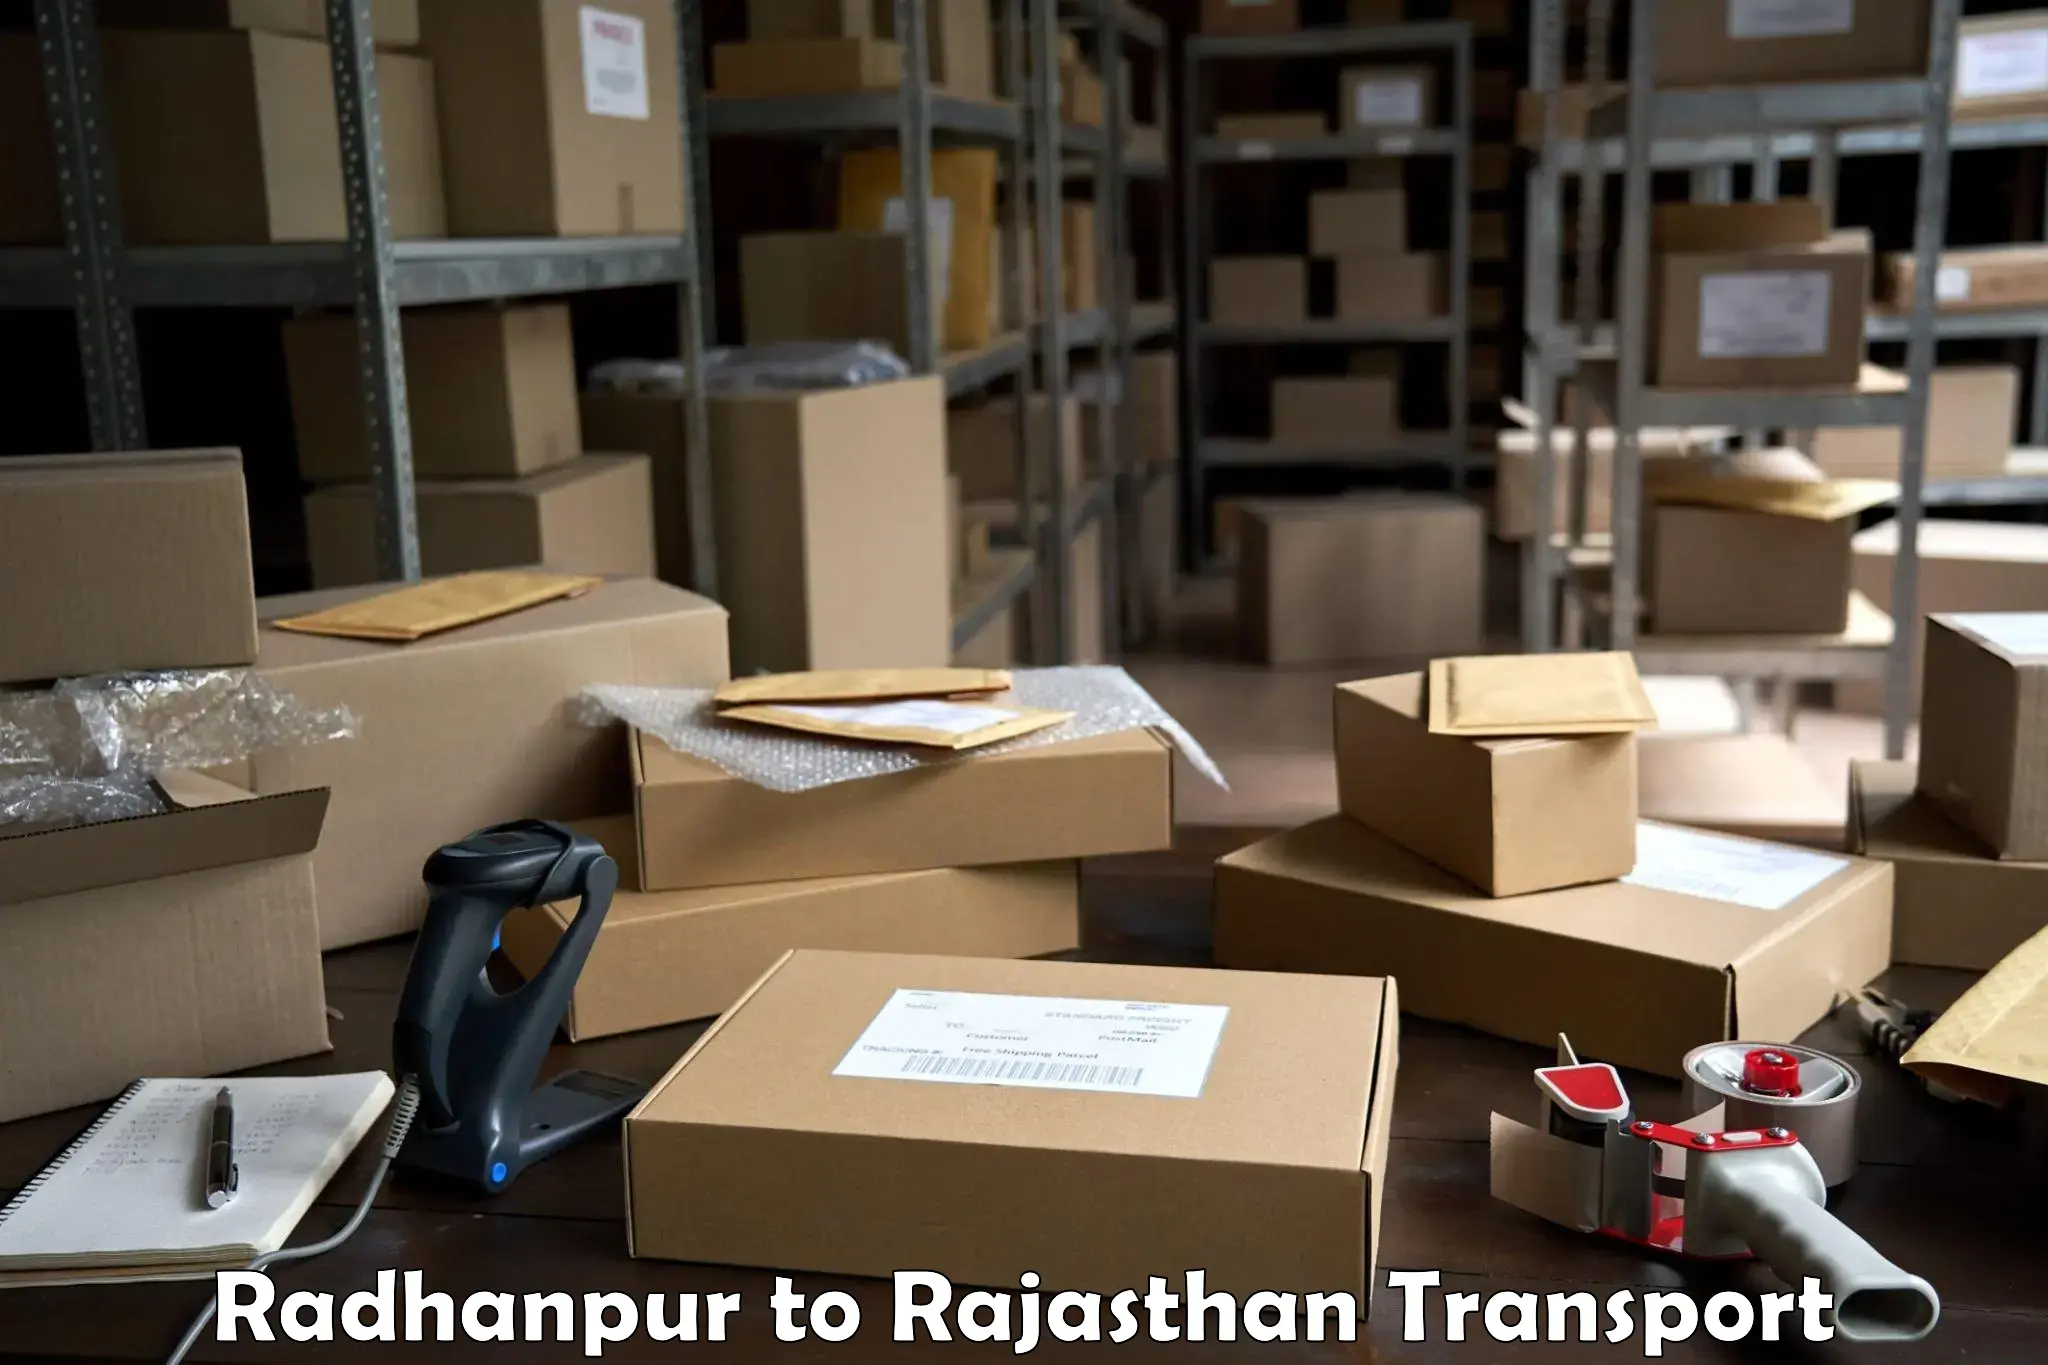 Container transport service Radhanpur to Nadoti